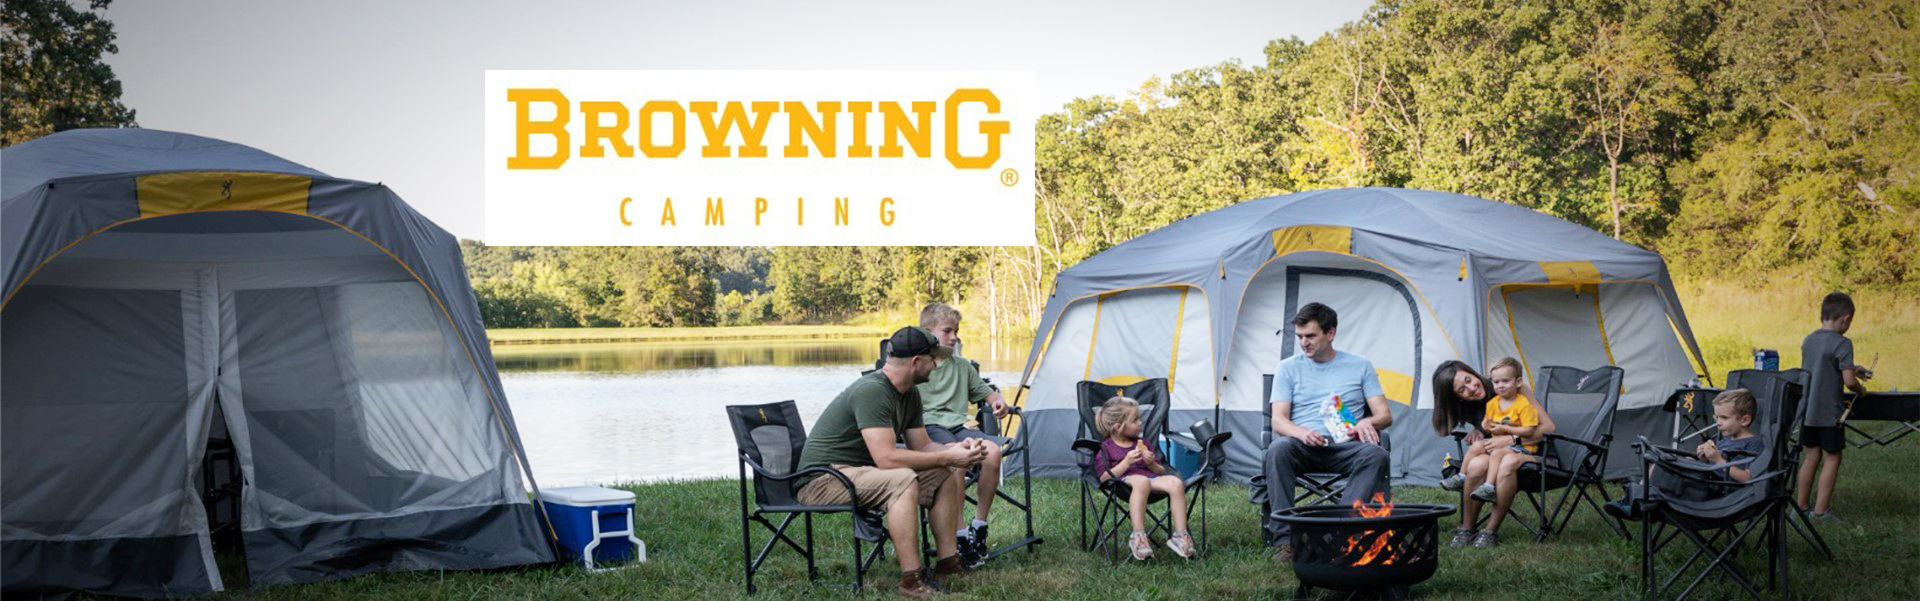 browning-camping-brand-page-banner.jpg